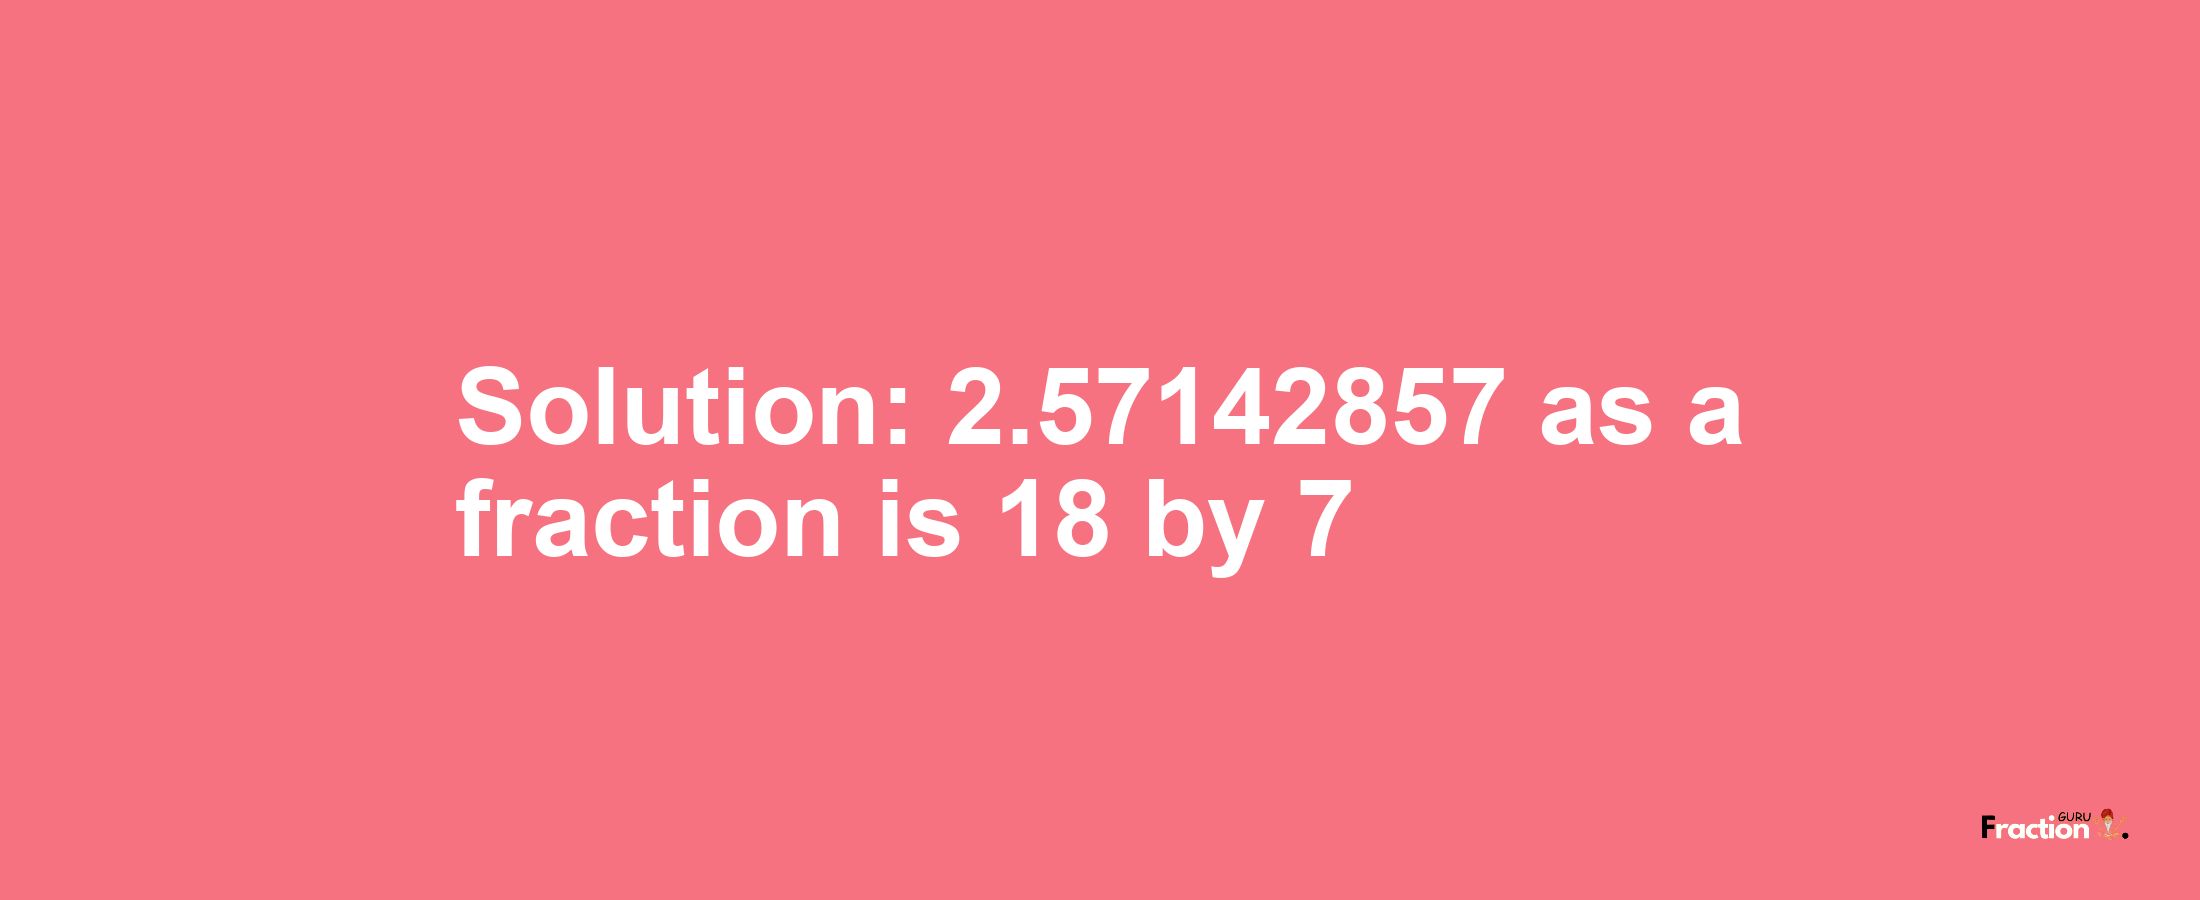 Solution:2.57142857 as a fraction is 18/7